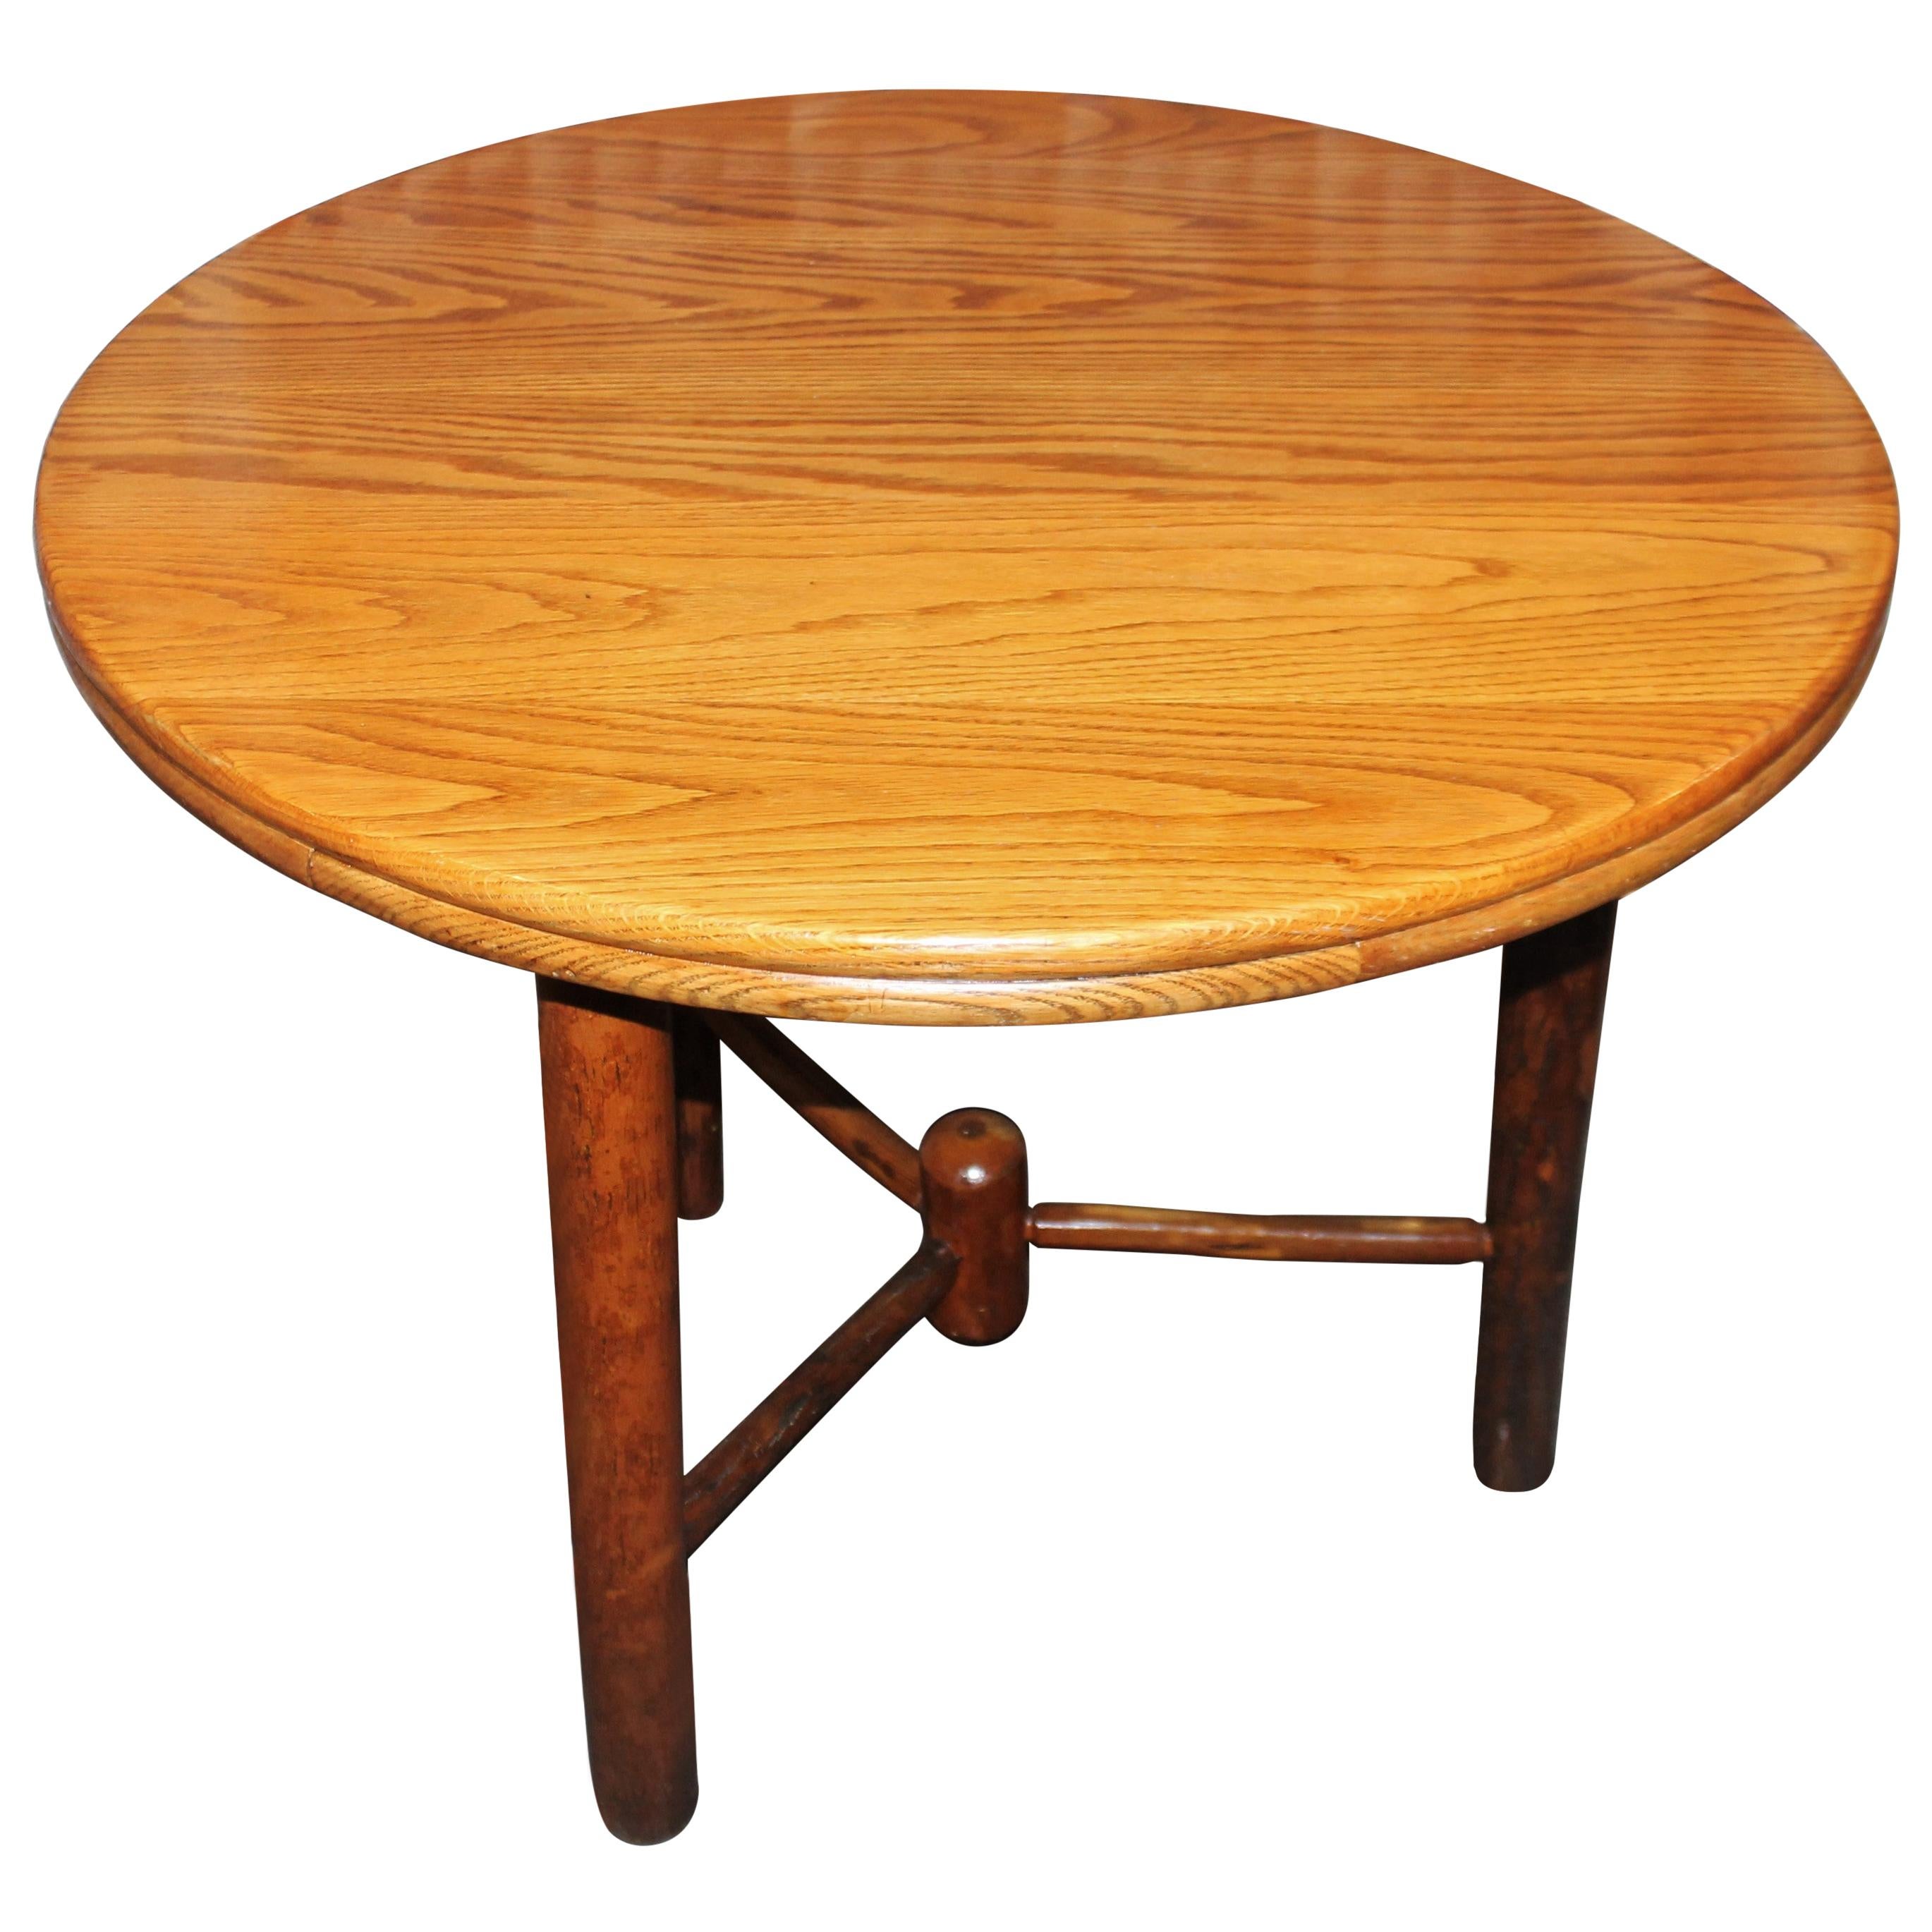 Antique Adirondack Old Hickory Table And Chairs For Sale At 1stdibs 